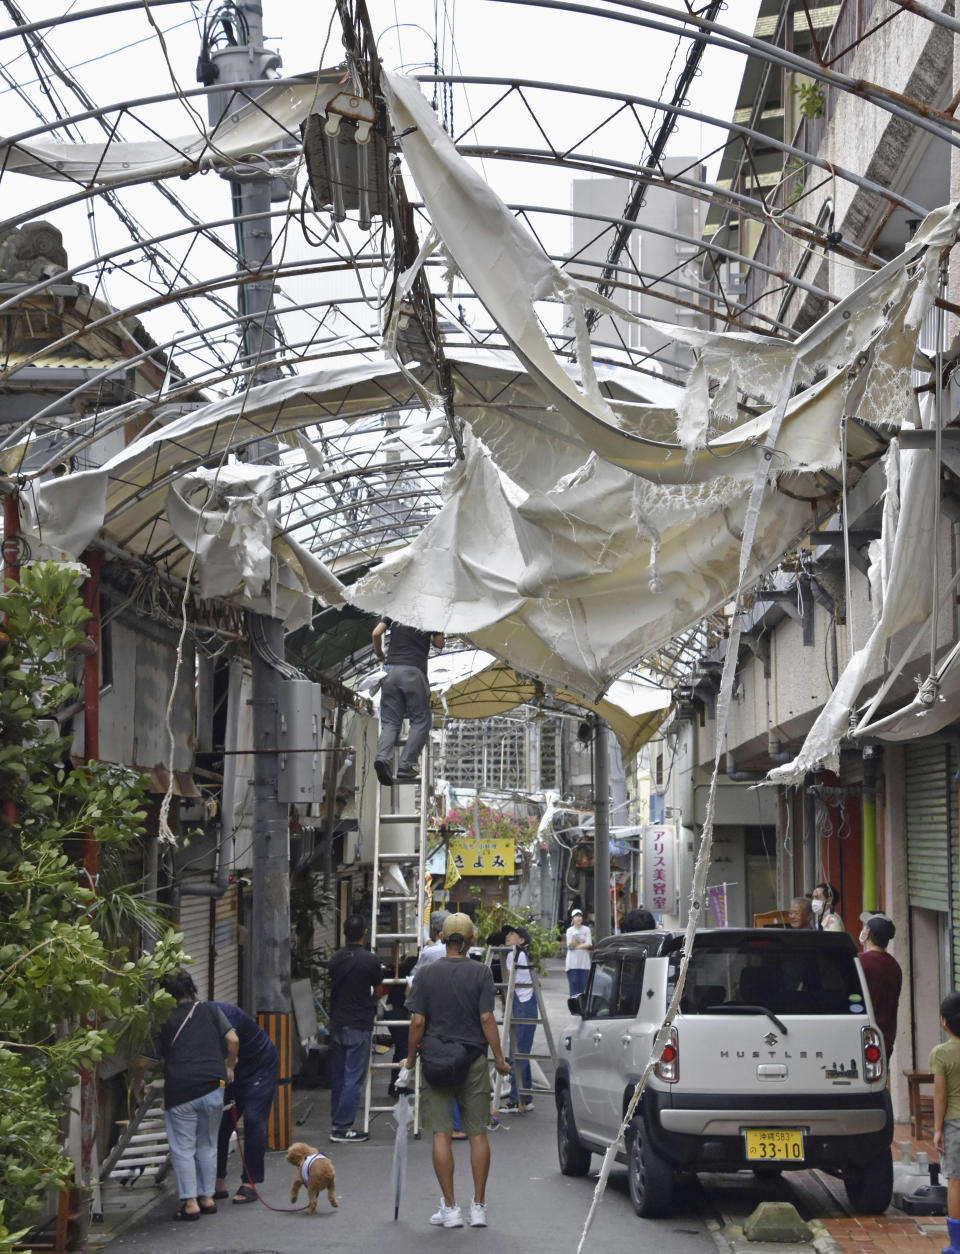 Workers try to restore the destruction caused by Typhoon Khanun, at a shopping district in Naha, Okinawa prefecture, southern Japan Thursday, Aug. 3, 2023. The typhoon that damaged homes and knocked out power on Okinawa and other Japanese islands this week was slowly moving west Thursday but is forecast to make a U-turn and dump even more rain on the archipelago. (Kyodo News via AP)